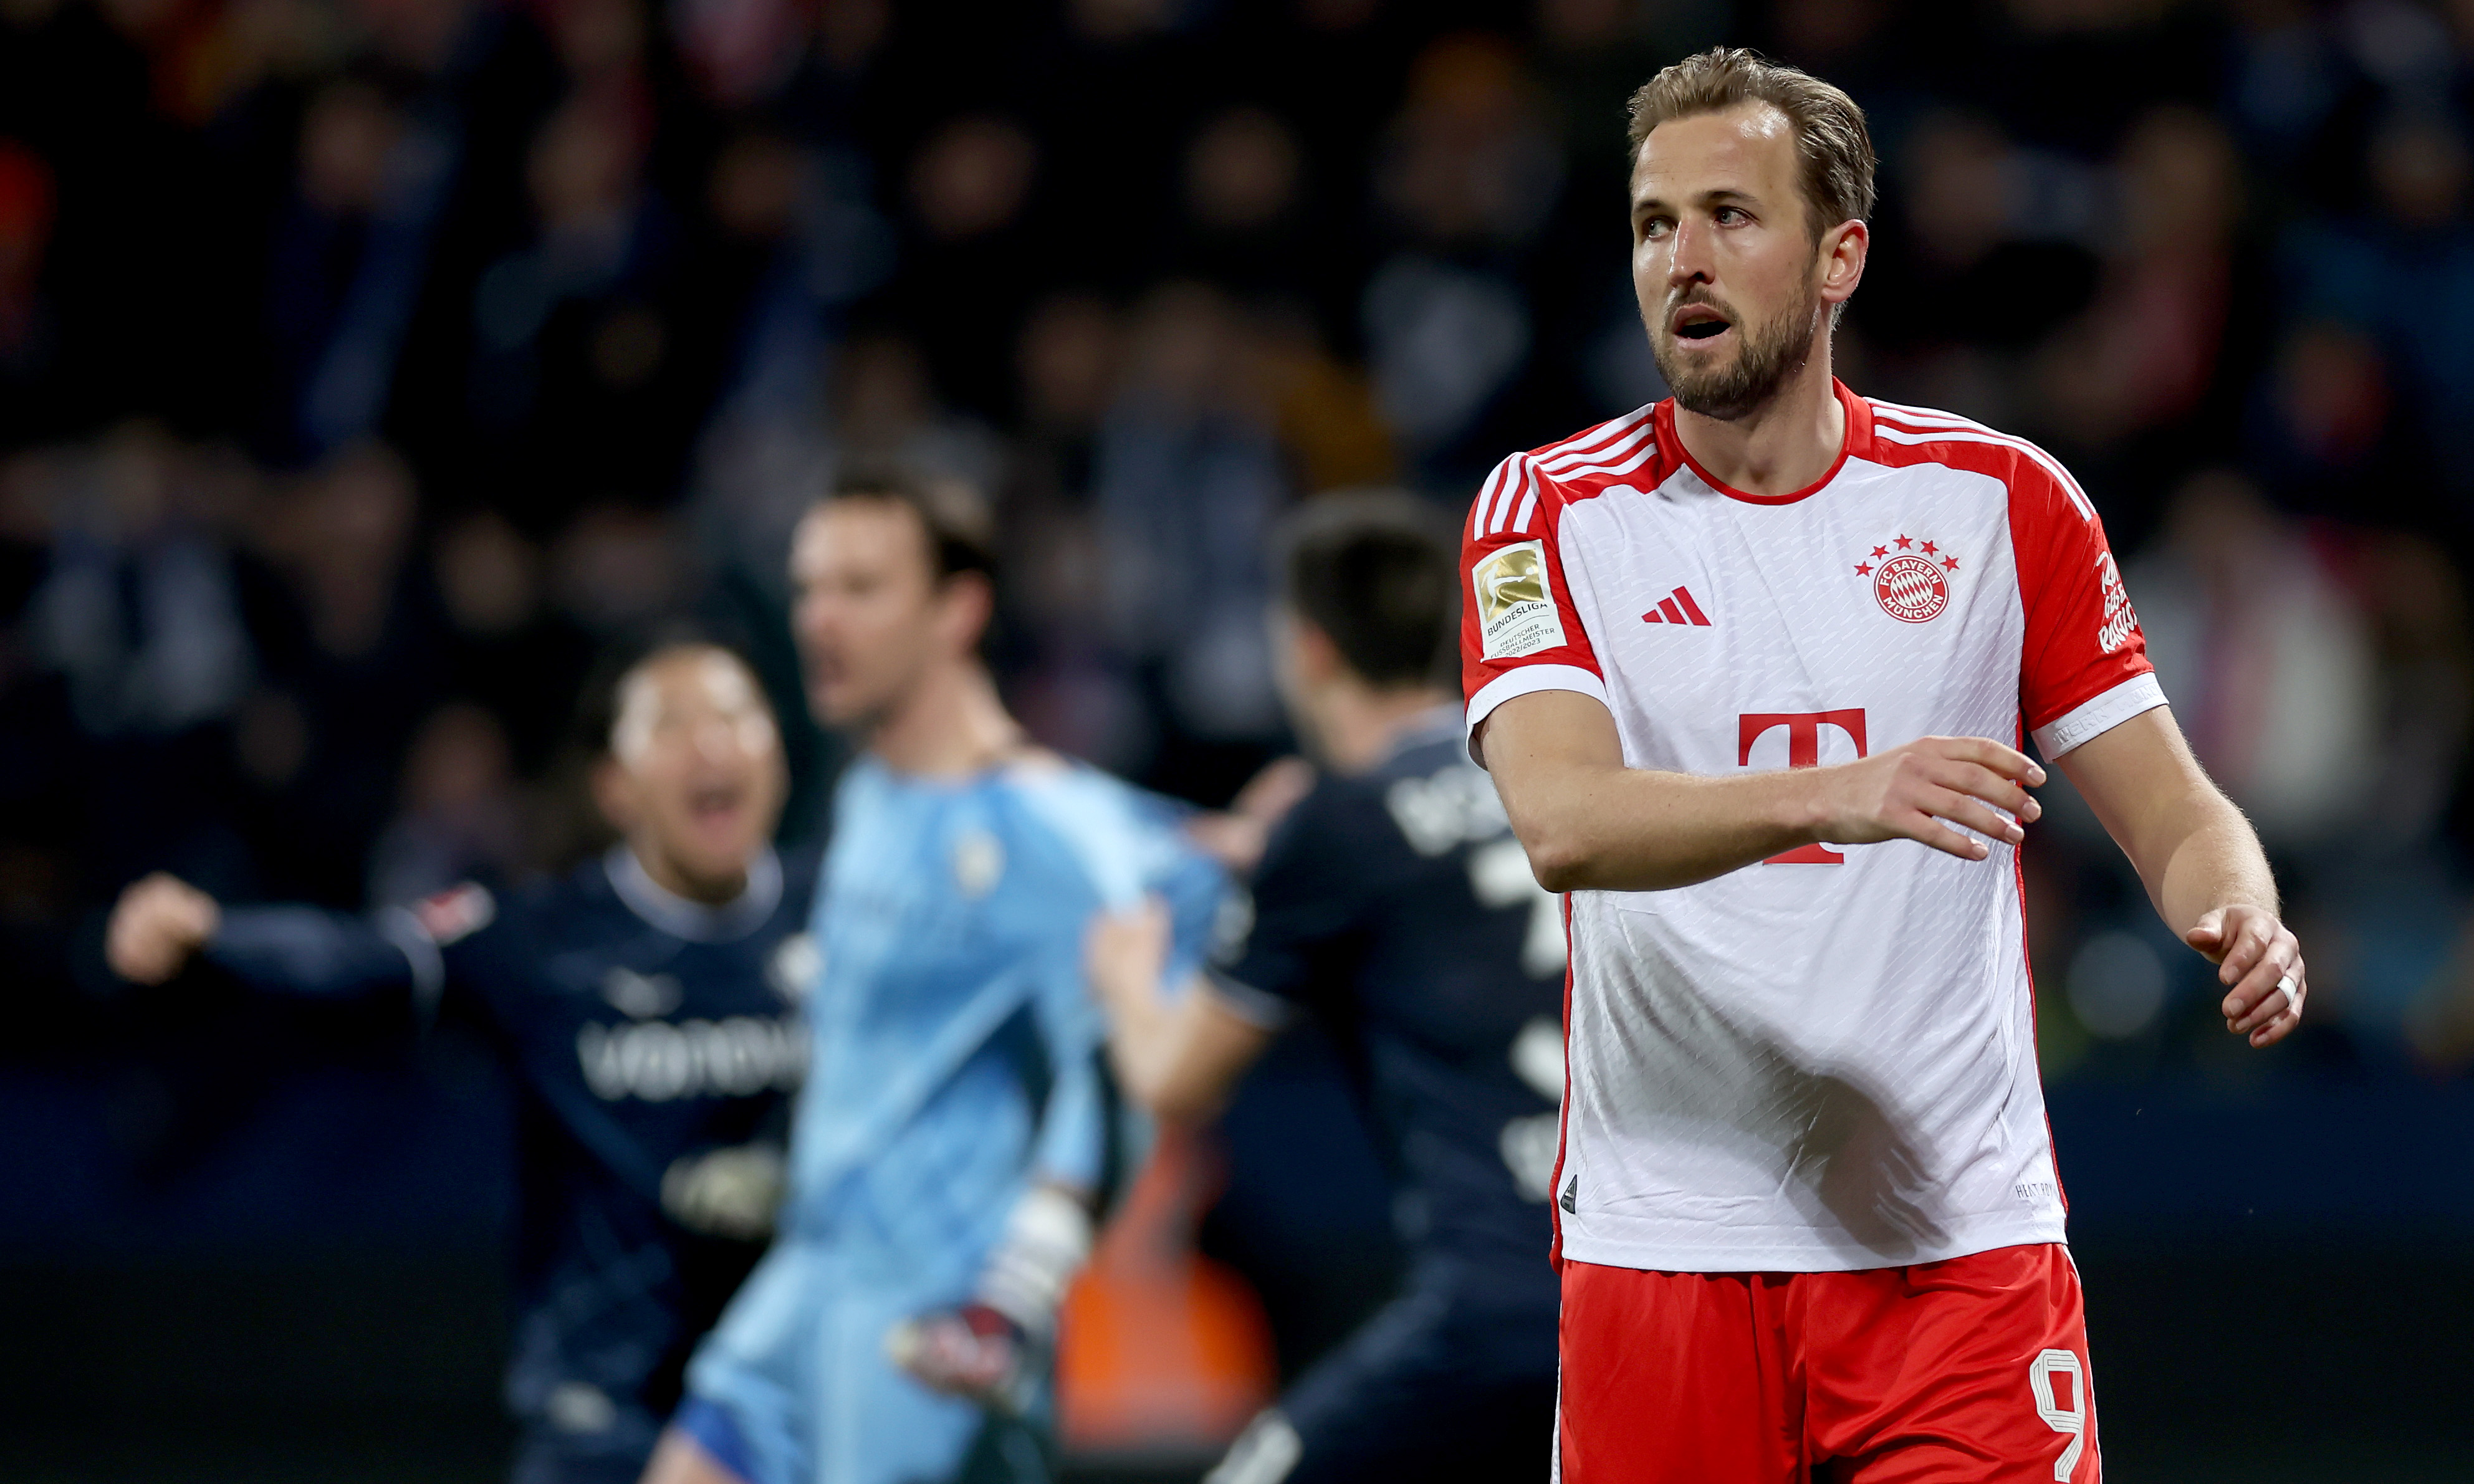 Bayern Munich's Harry Kane set for early reunion with Tottenham Hotspur ...